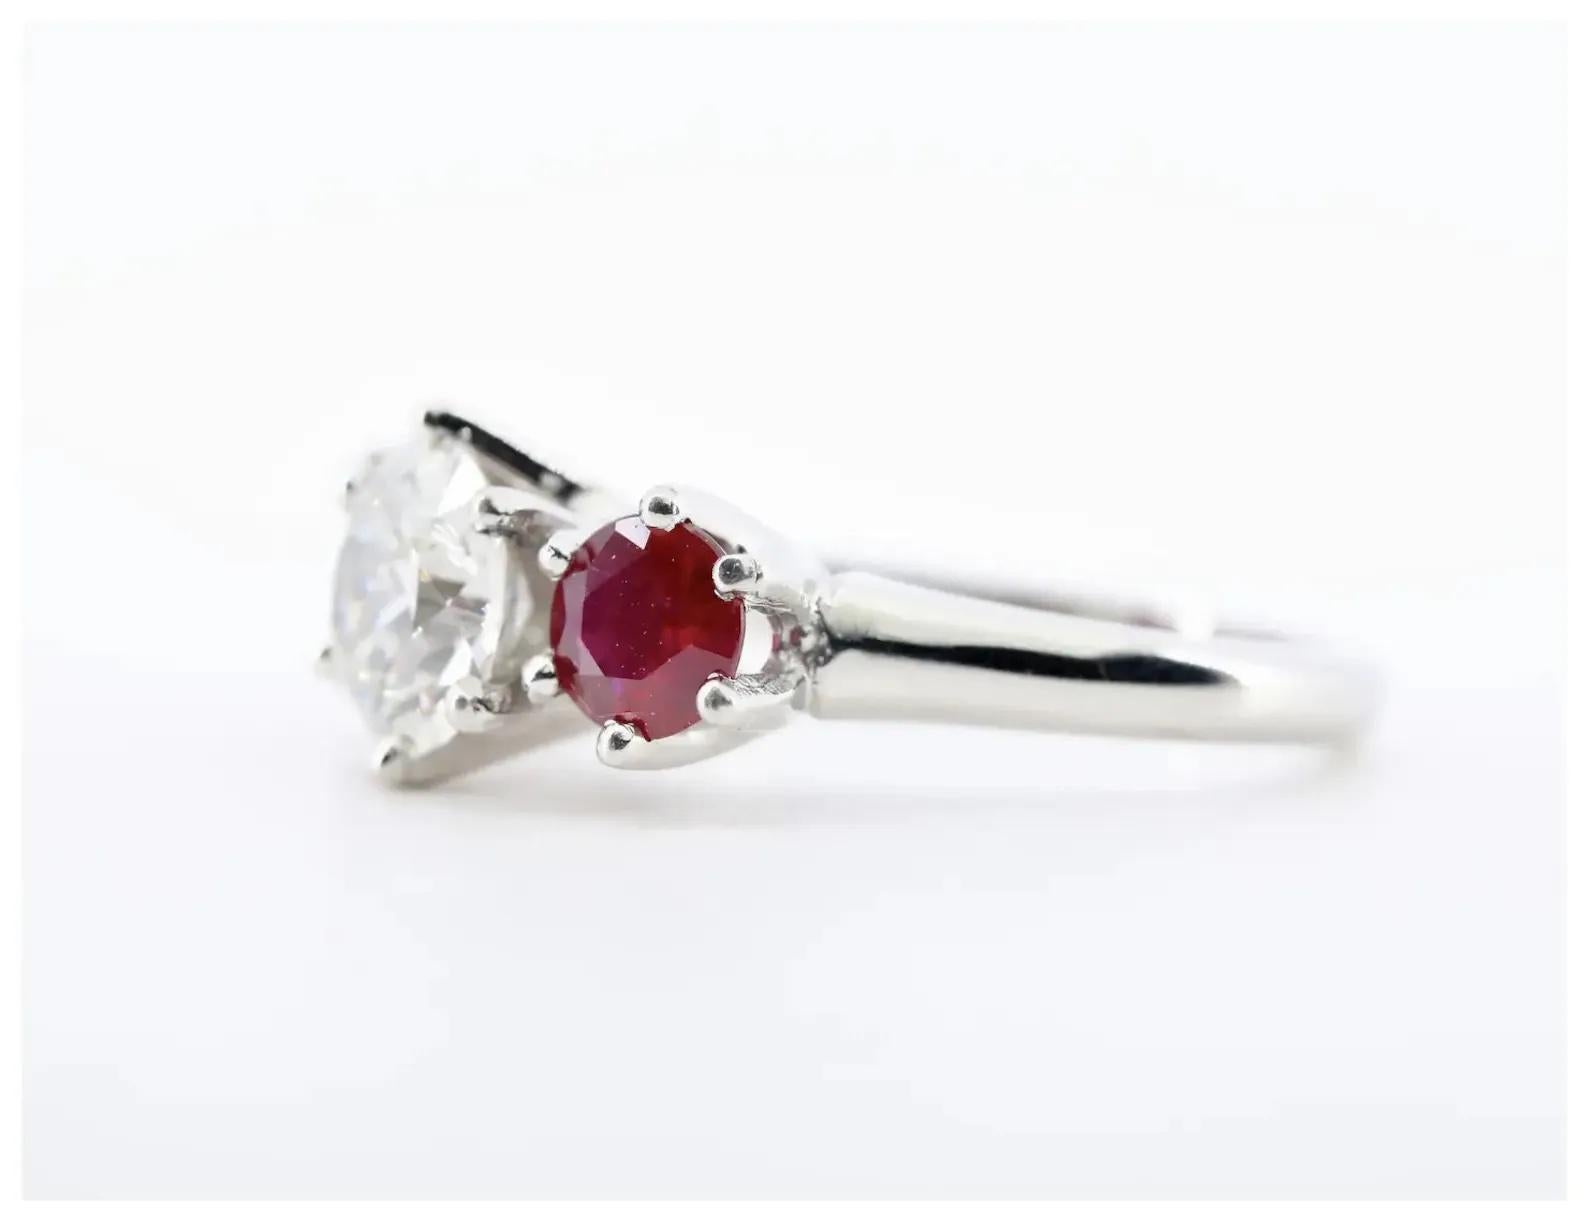 A beautiful Edwardian period three stone diamond, and ruby engagement ring in platinum.

Centered by a 1.18 carat H color I1 clarity old European cut diamond.

Framed by a pair of 1.00ctw rubies of beautiful vivid red color.

Tested as